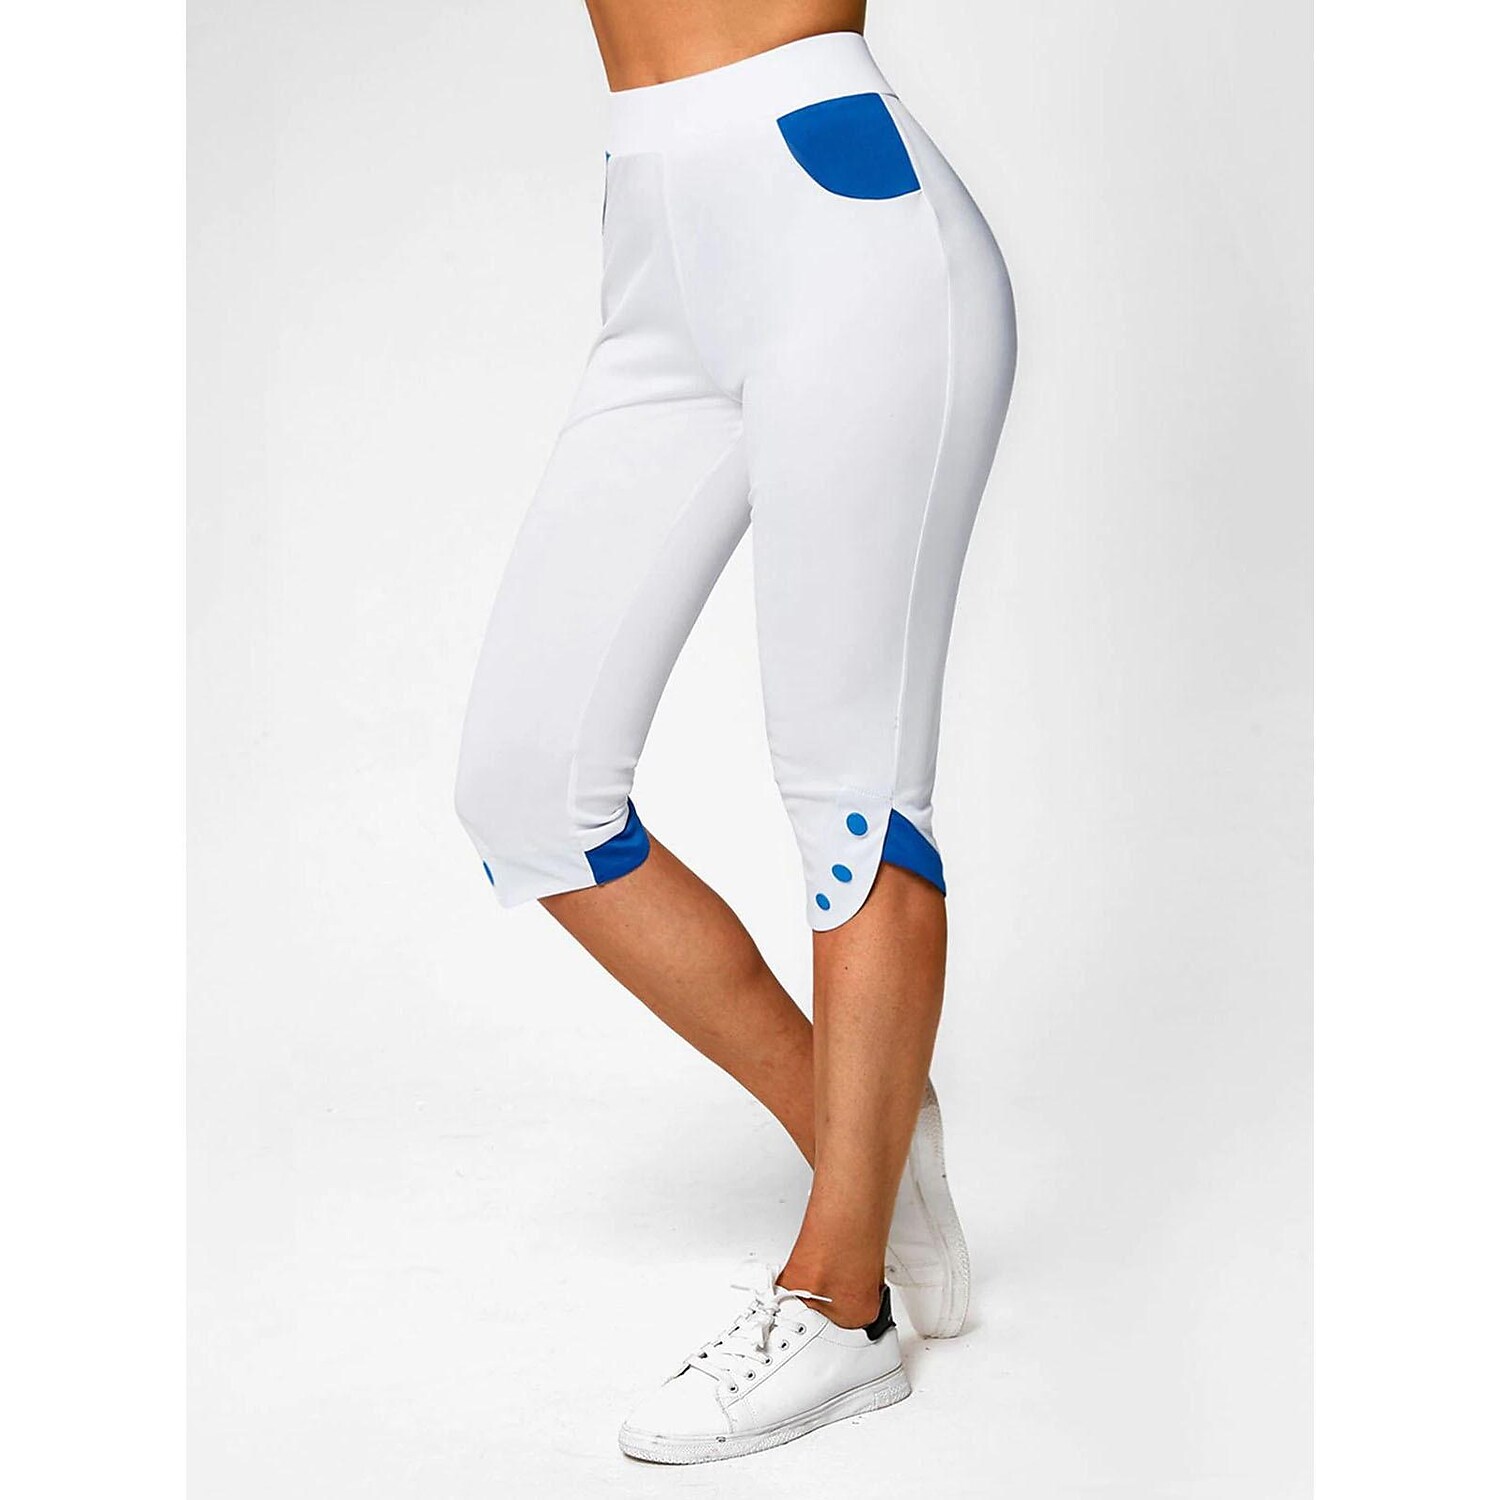 Women's color matching casual sports yoga cropped pants